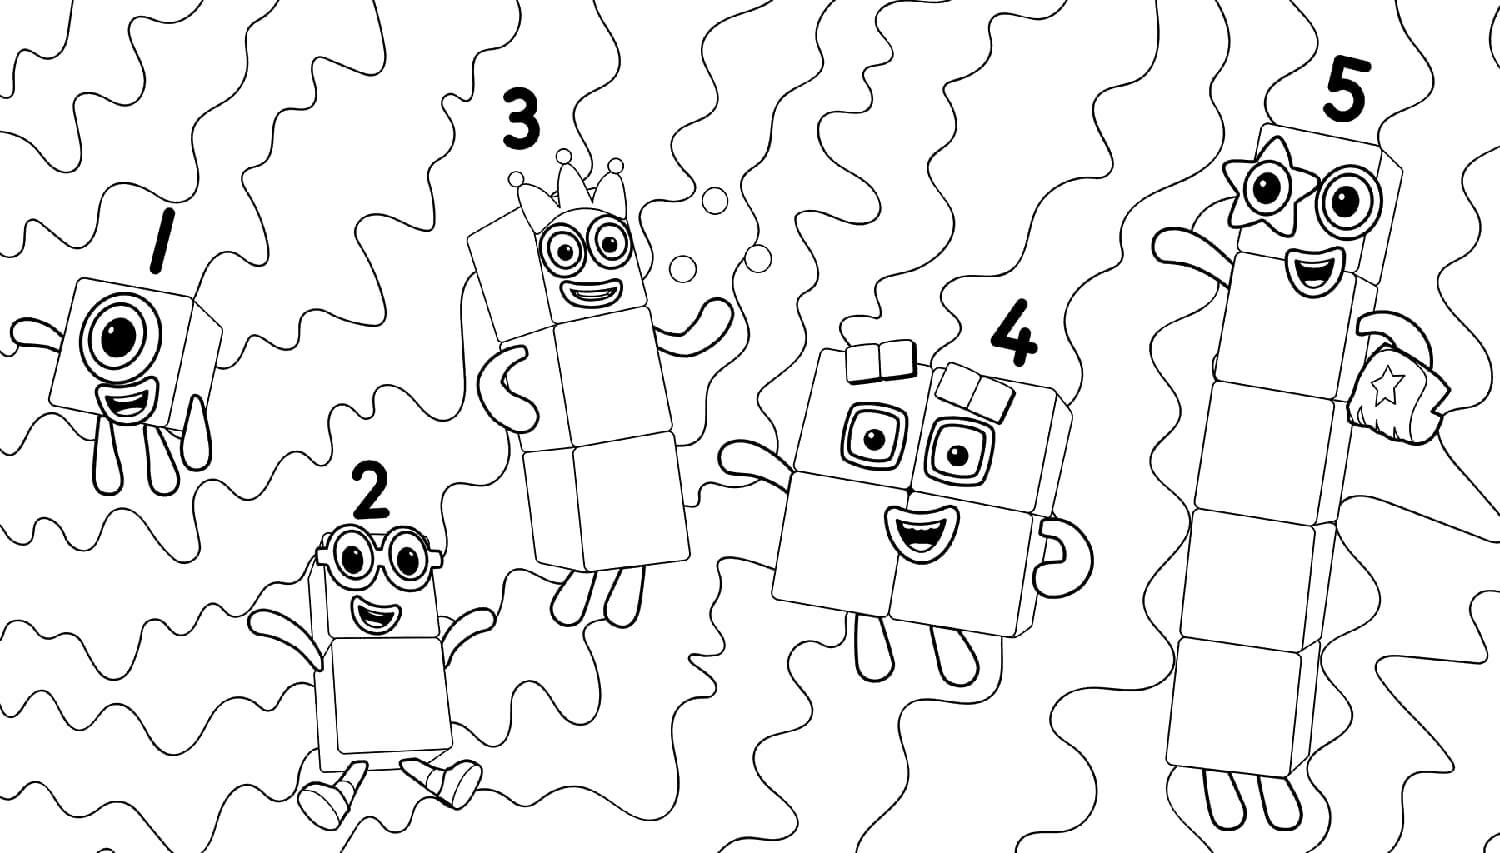 Numberblocks from 1 to 5 Coloring Page - Free Printable Coloring Pages